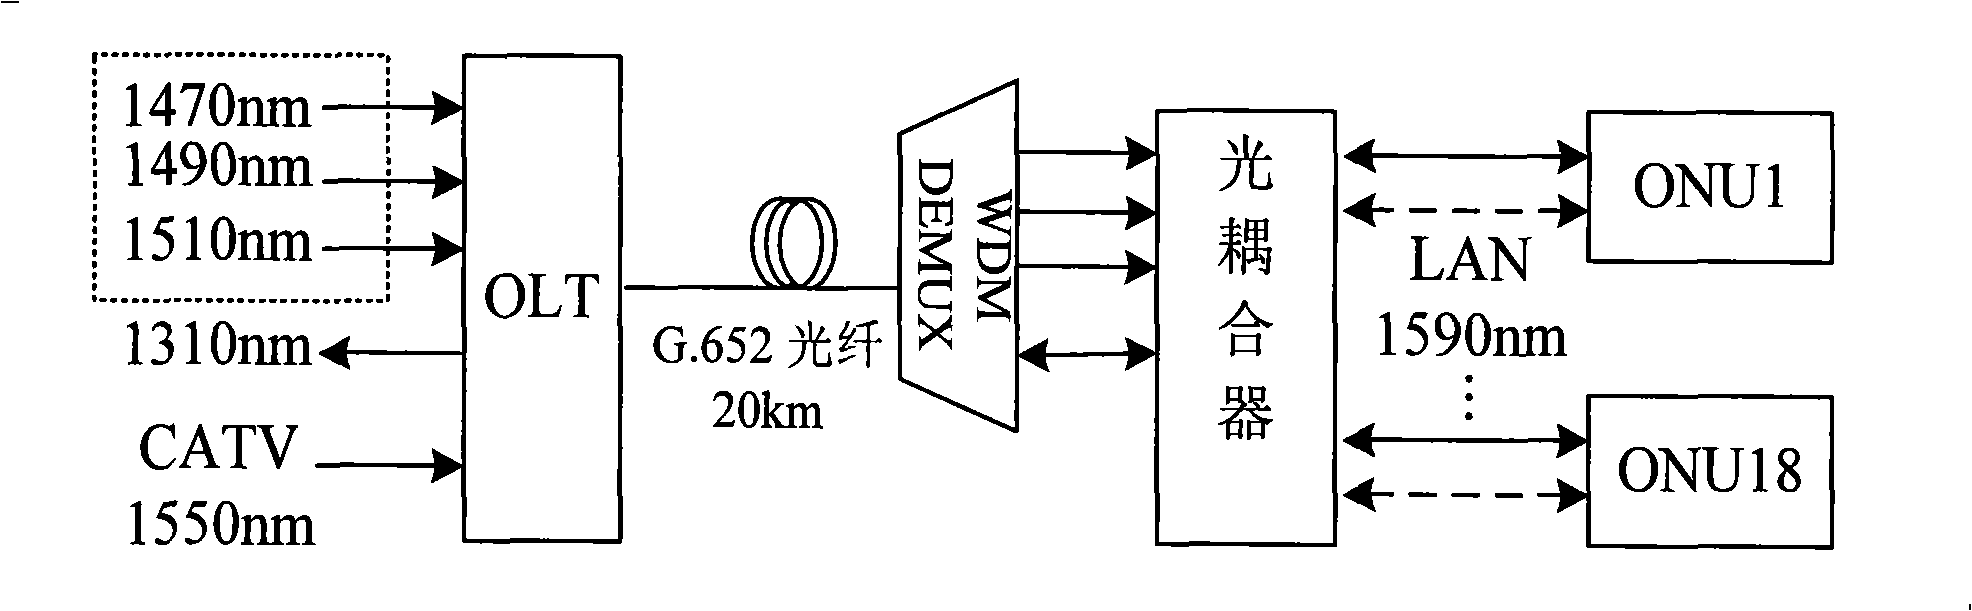 PON system mixing TDMA and WDM having function of local area network